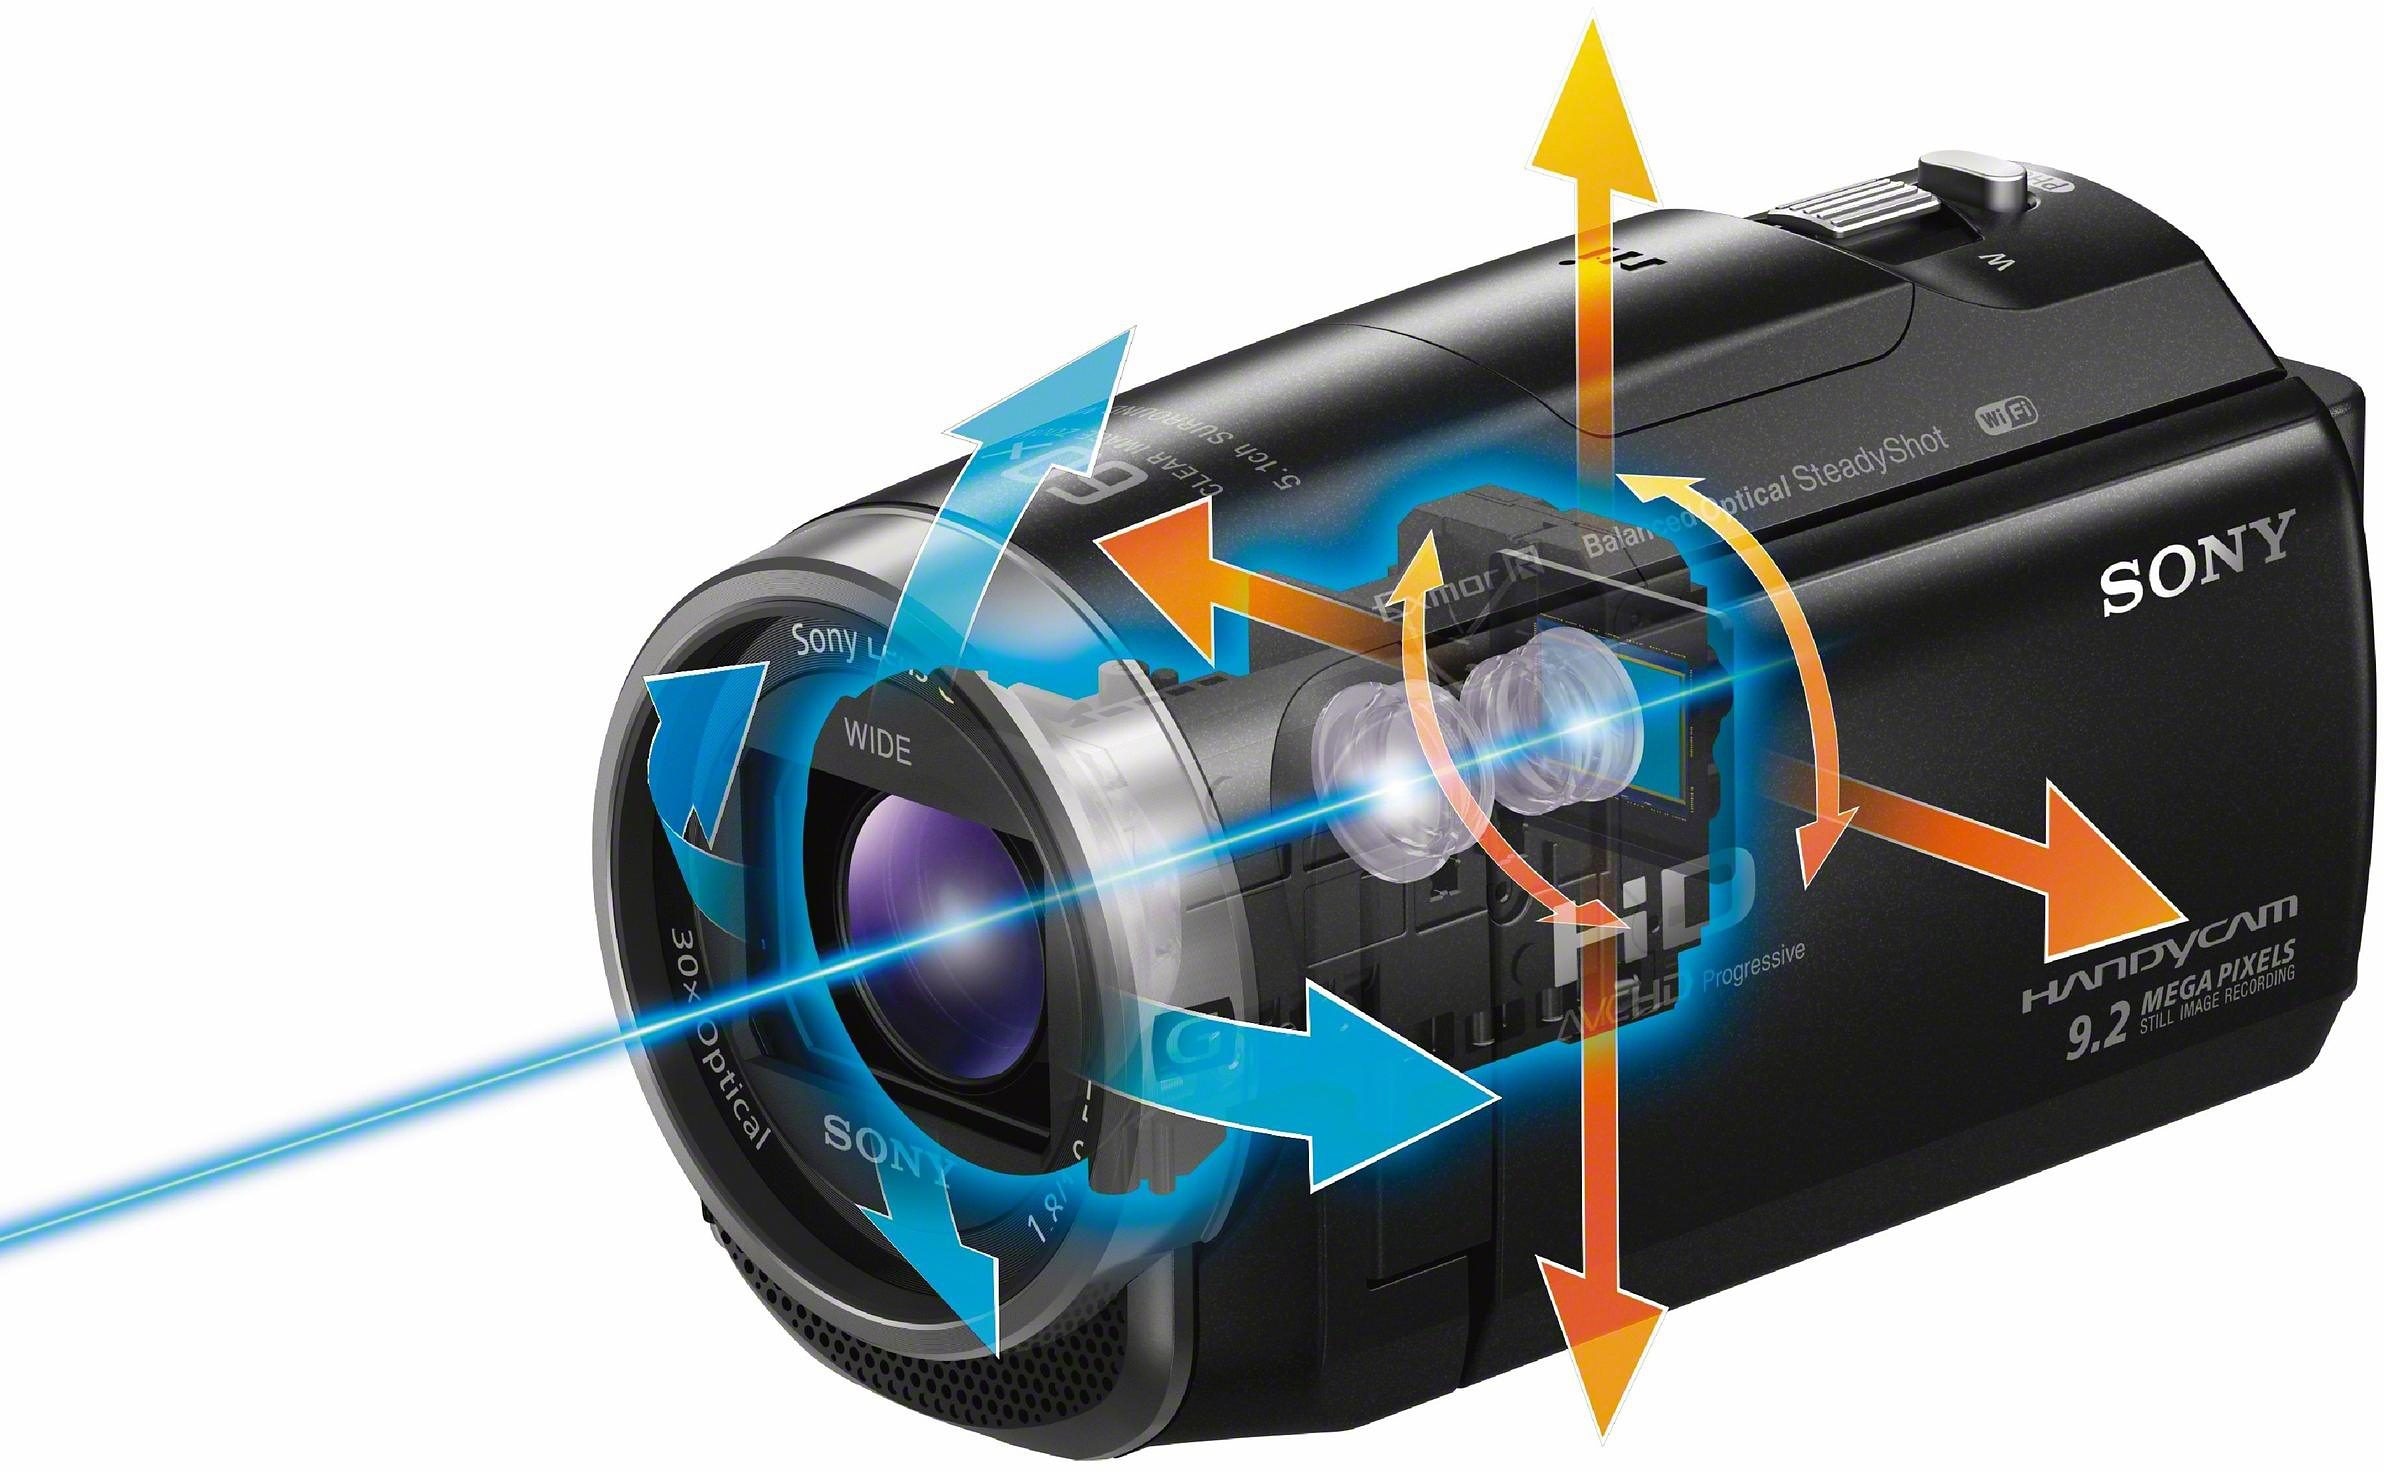 Sony Camcorder »HDR-CX625B«, Full HD, NFC-WLAN (Wi-Fi), 30 fachx opt. Zoom, 26,8mm Weitwinkel